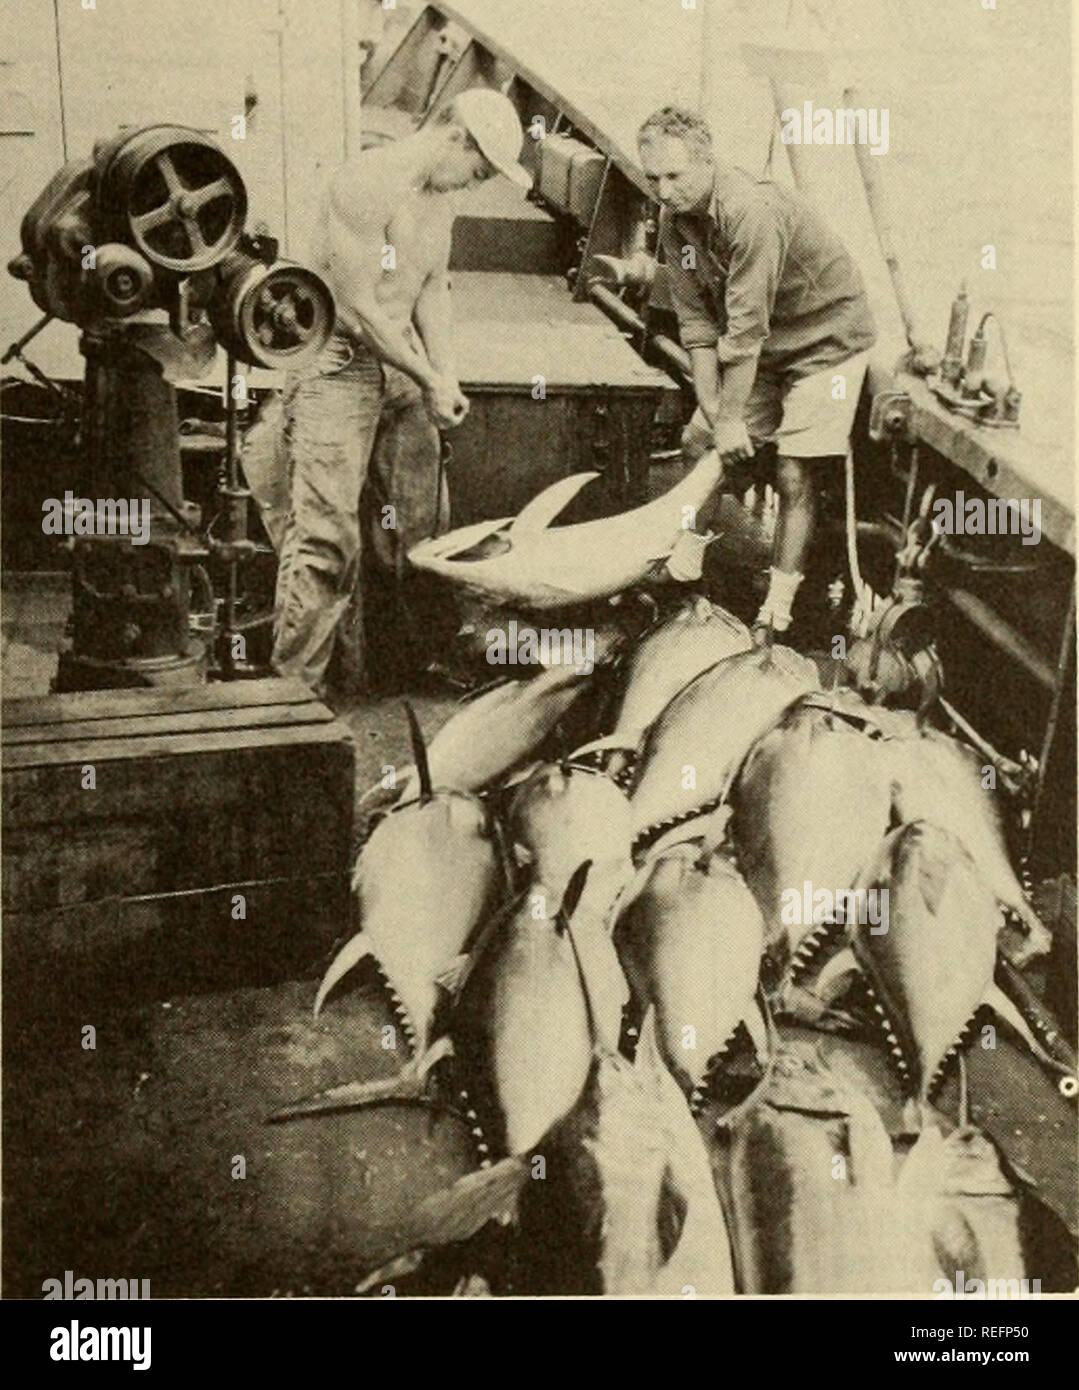 . Commercial fisheries review. Fisheries; Fish trade. October 1955 COMMERCIAL FISHERIES REVIEW used alternately, the catch on fish approximately doubled that on squid. This was surprising in view of the fact that a large majority of the yellowfin stomachs con- tained both squid and octopus. Many other species of fish were tried to some extent, including menhaden, pinfish, porgies, fly- ingfish, and all caught some yel- lowfin. Scrap from deep-water trawling was tried, including gempylids, bercoids, and hake, each catching some yellowfin in the limited trials. Yellowfin ranged from 9 to 190 pou Stock Photo